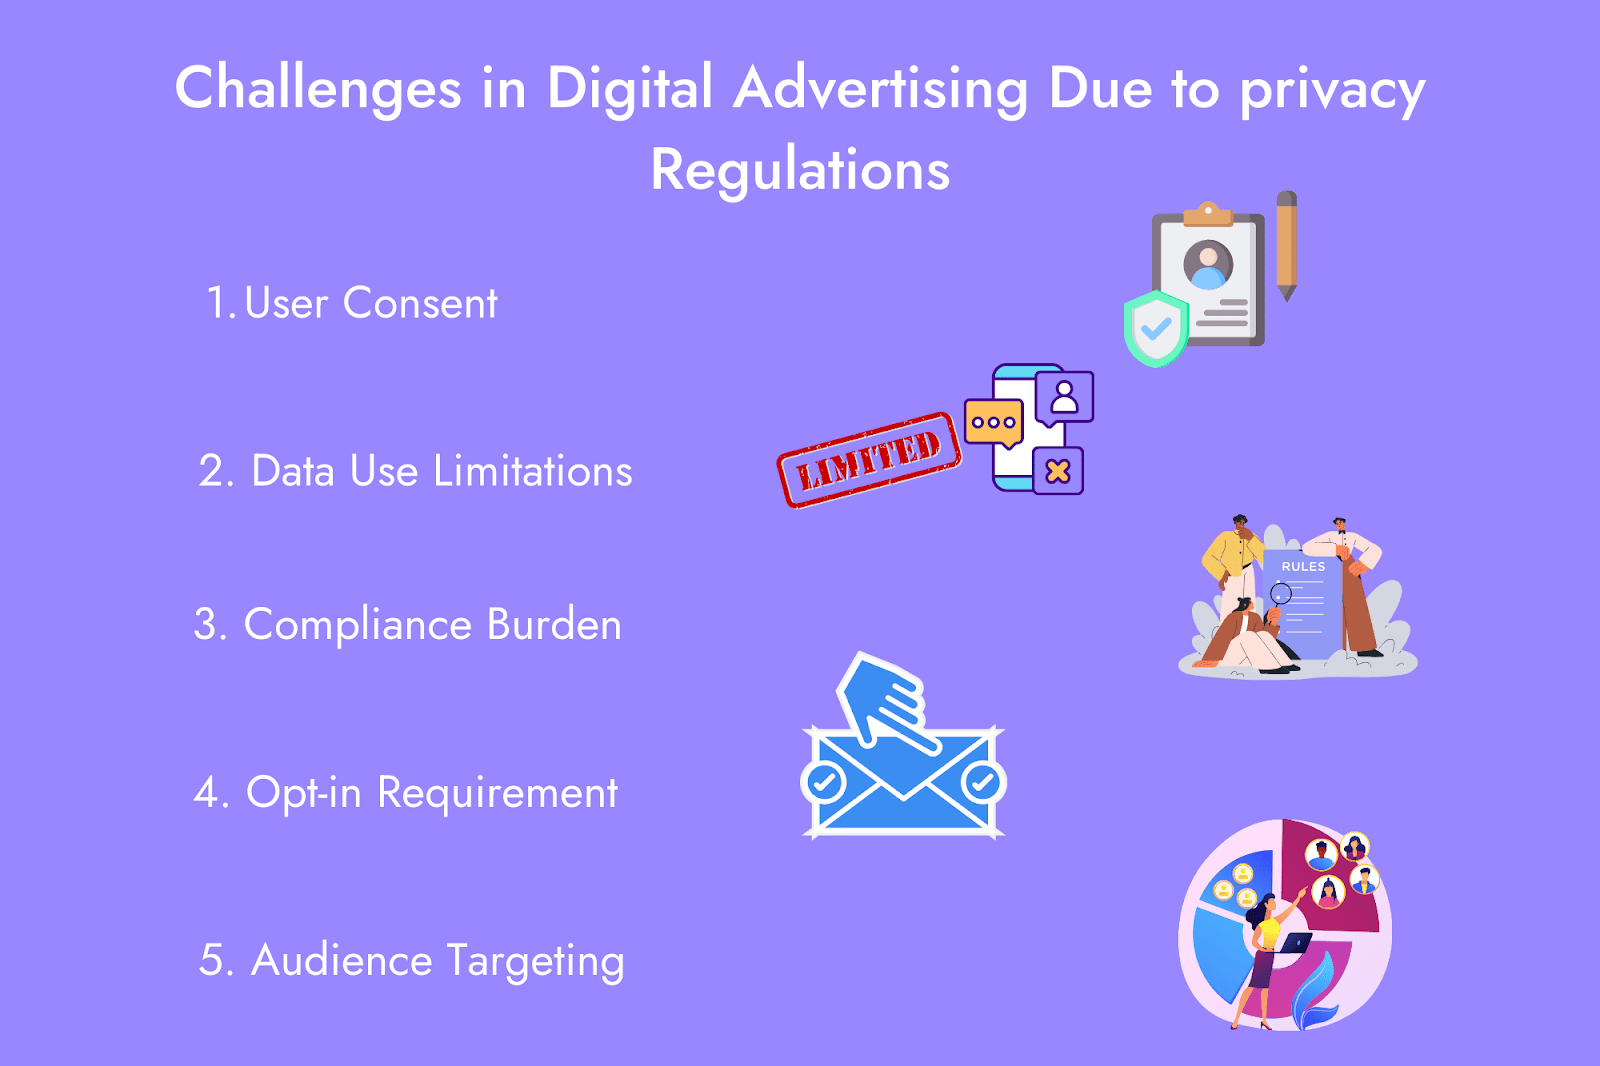 Challenges Due to Privacy Regulations